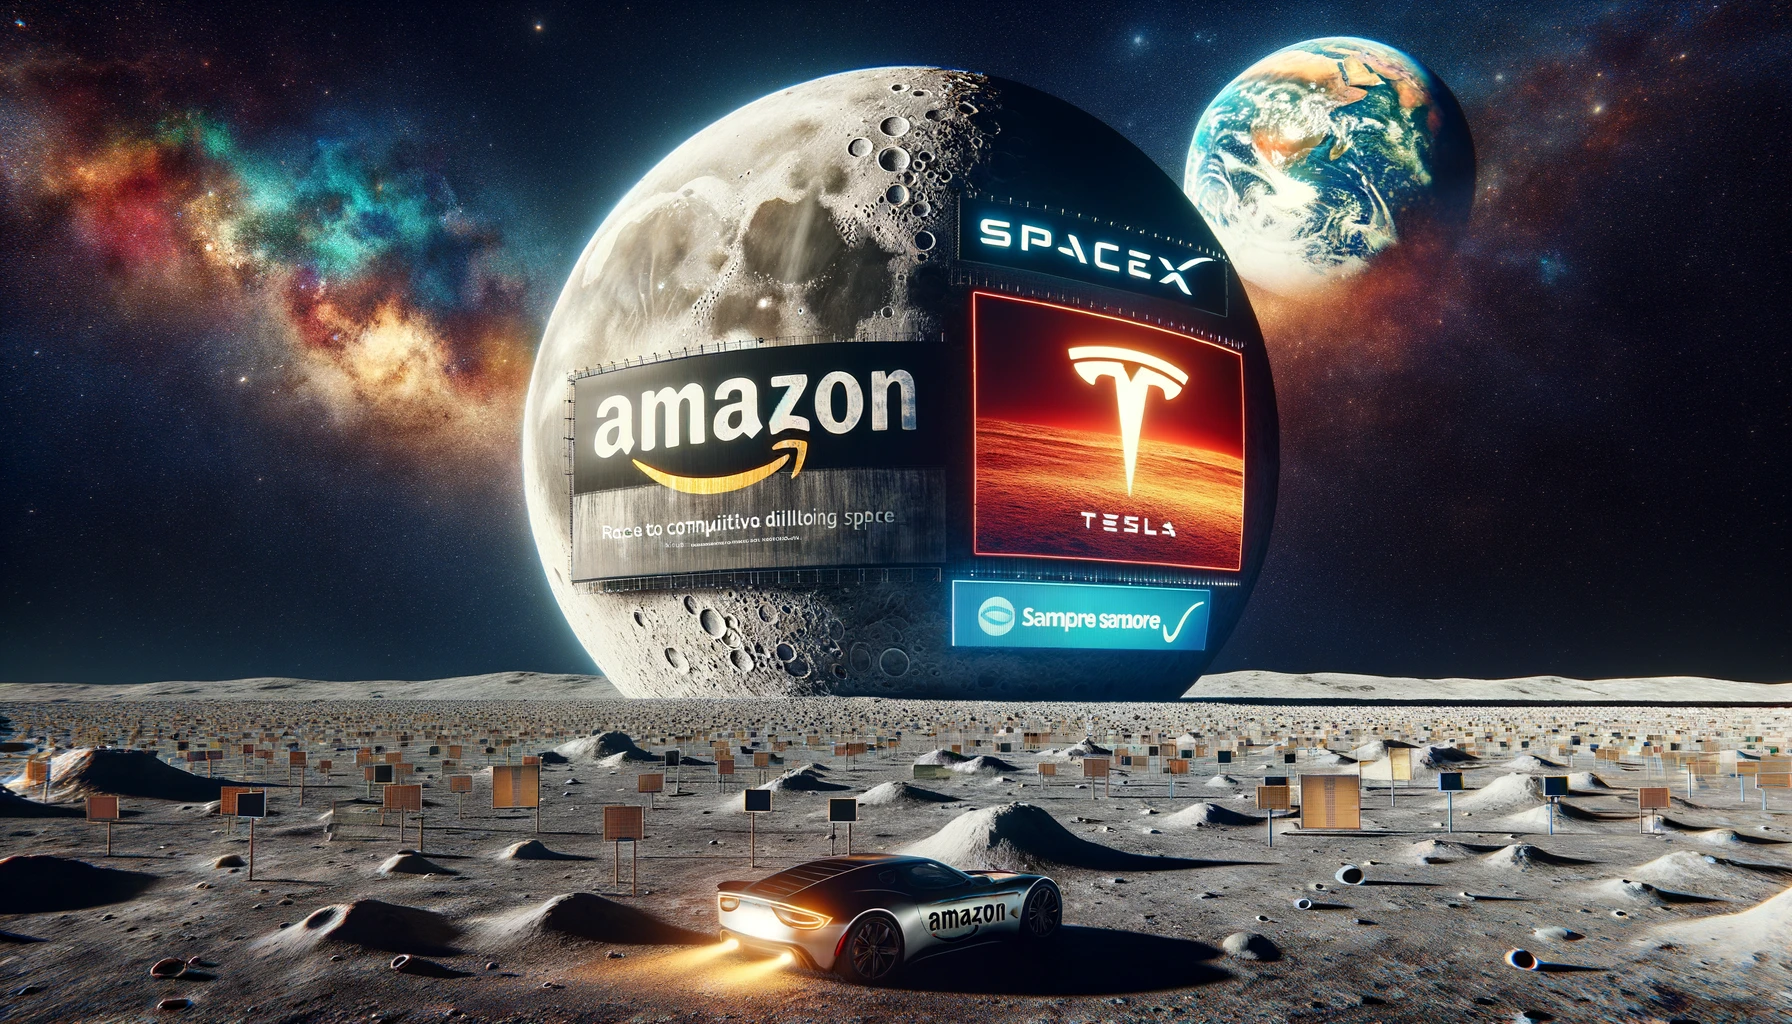 advertising-on-the-moon-spacex-amazon-csdn